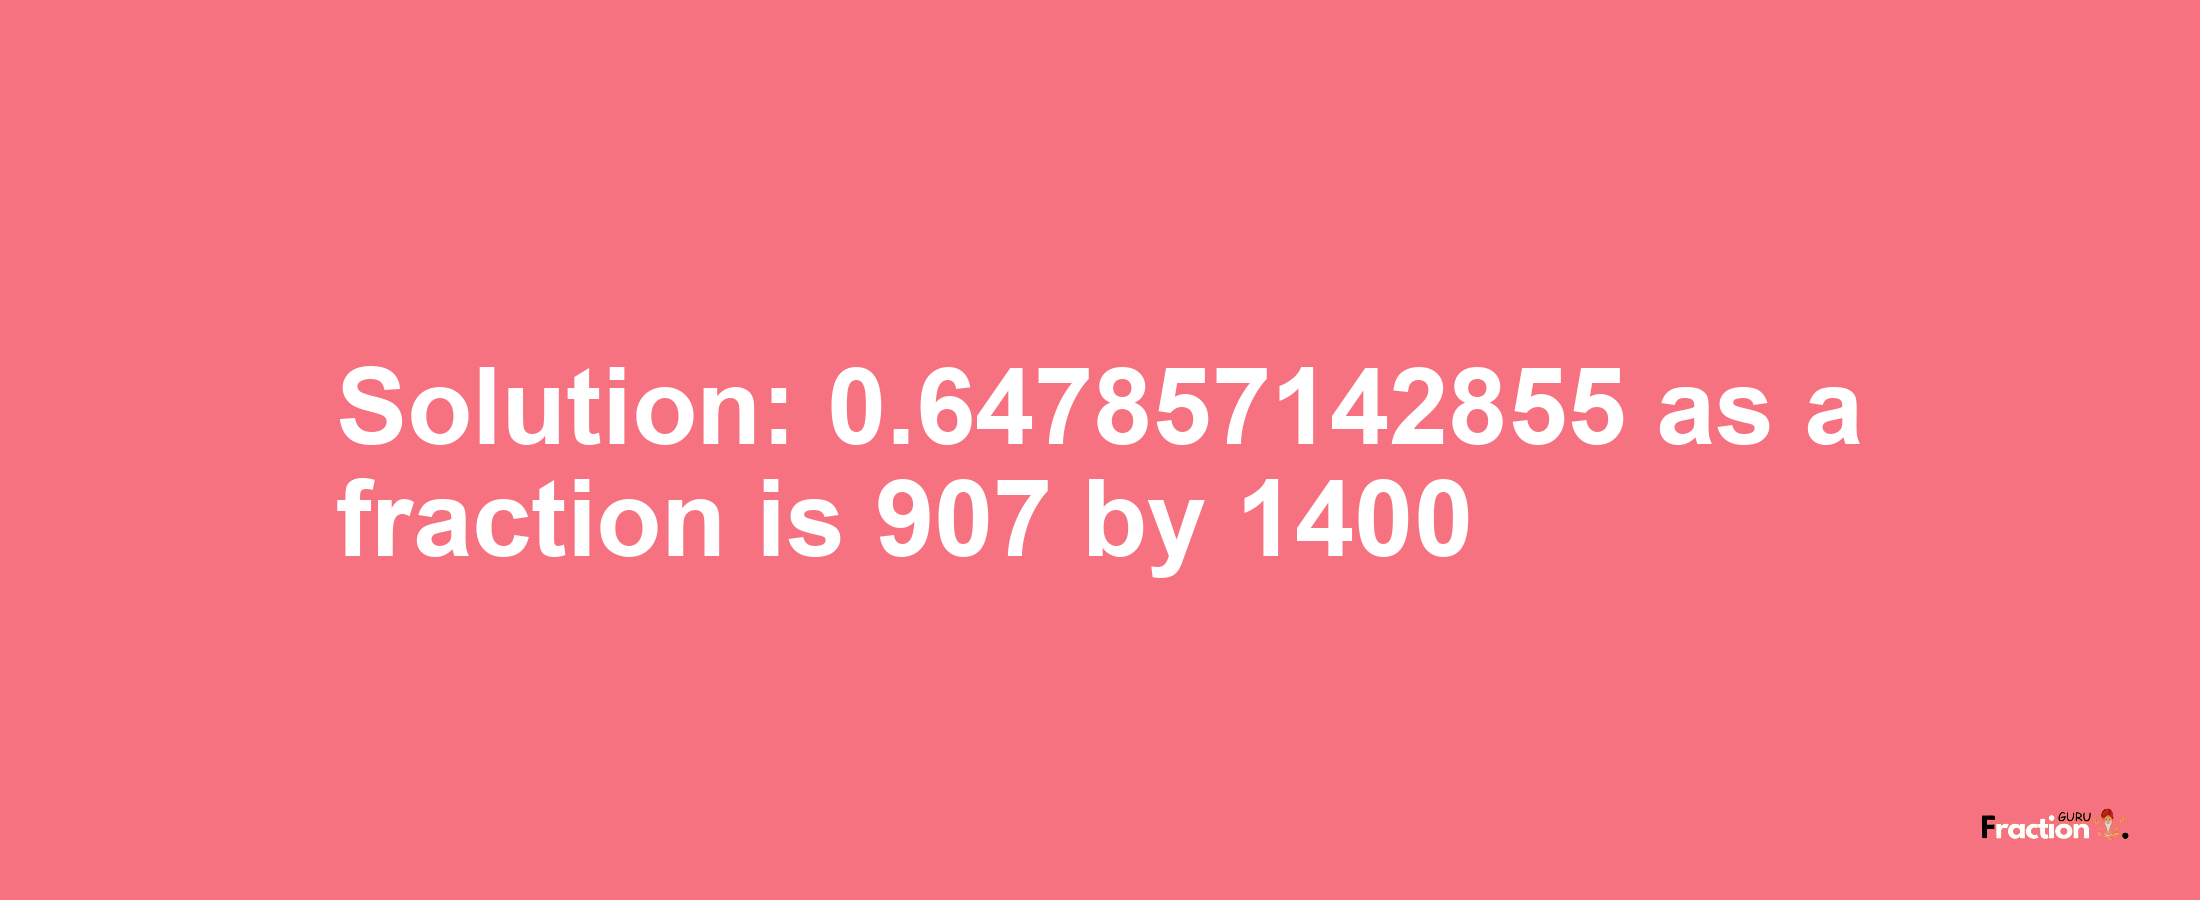 Solution:0.647857142855 as a fraction is 907/1400